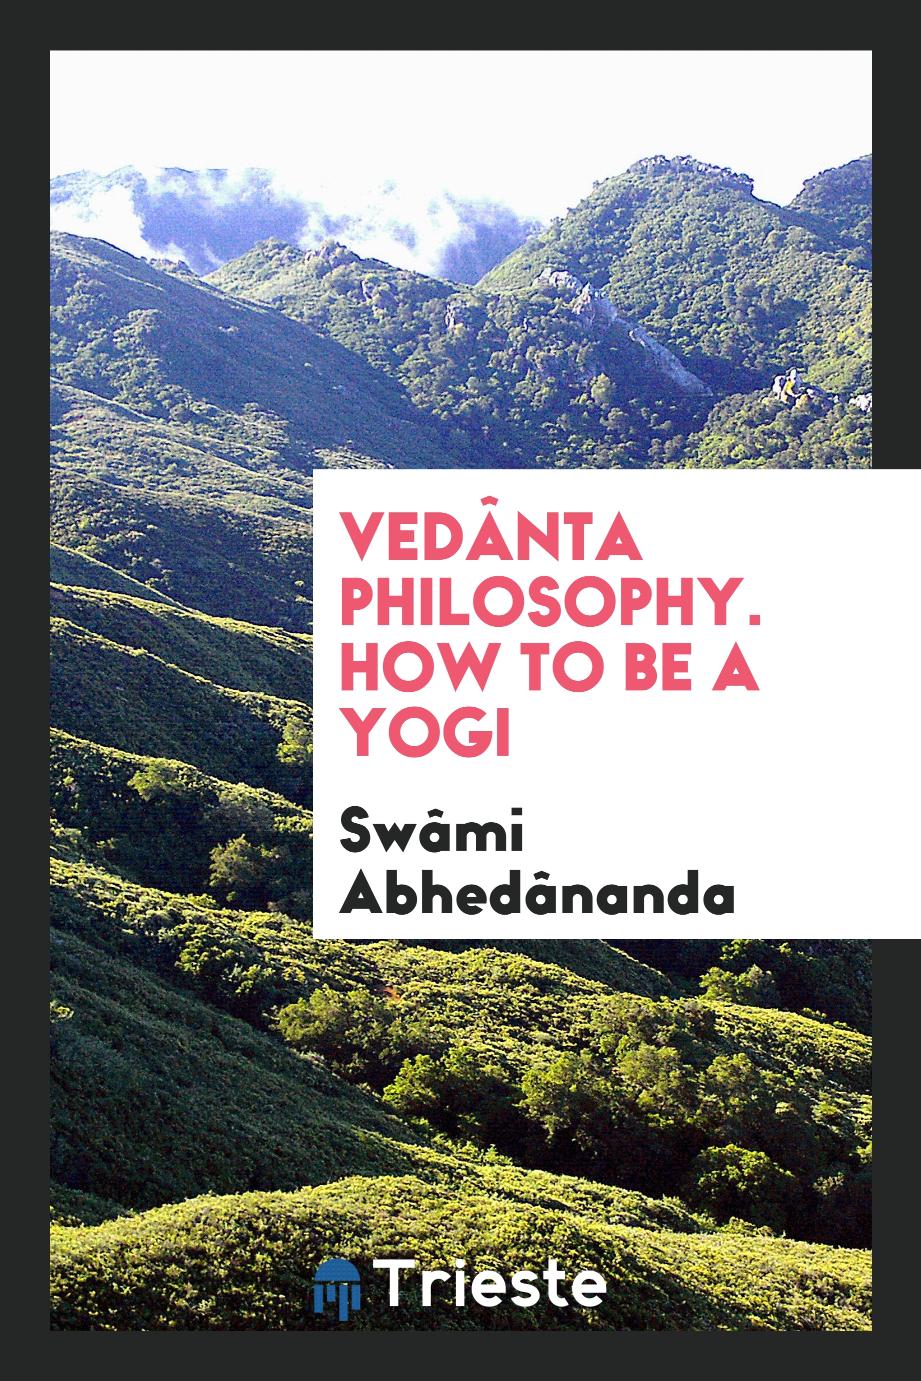 Vedânta Philosophy. How to Be a Yogi